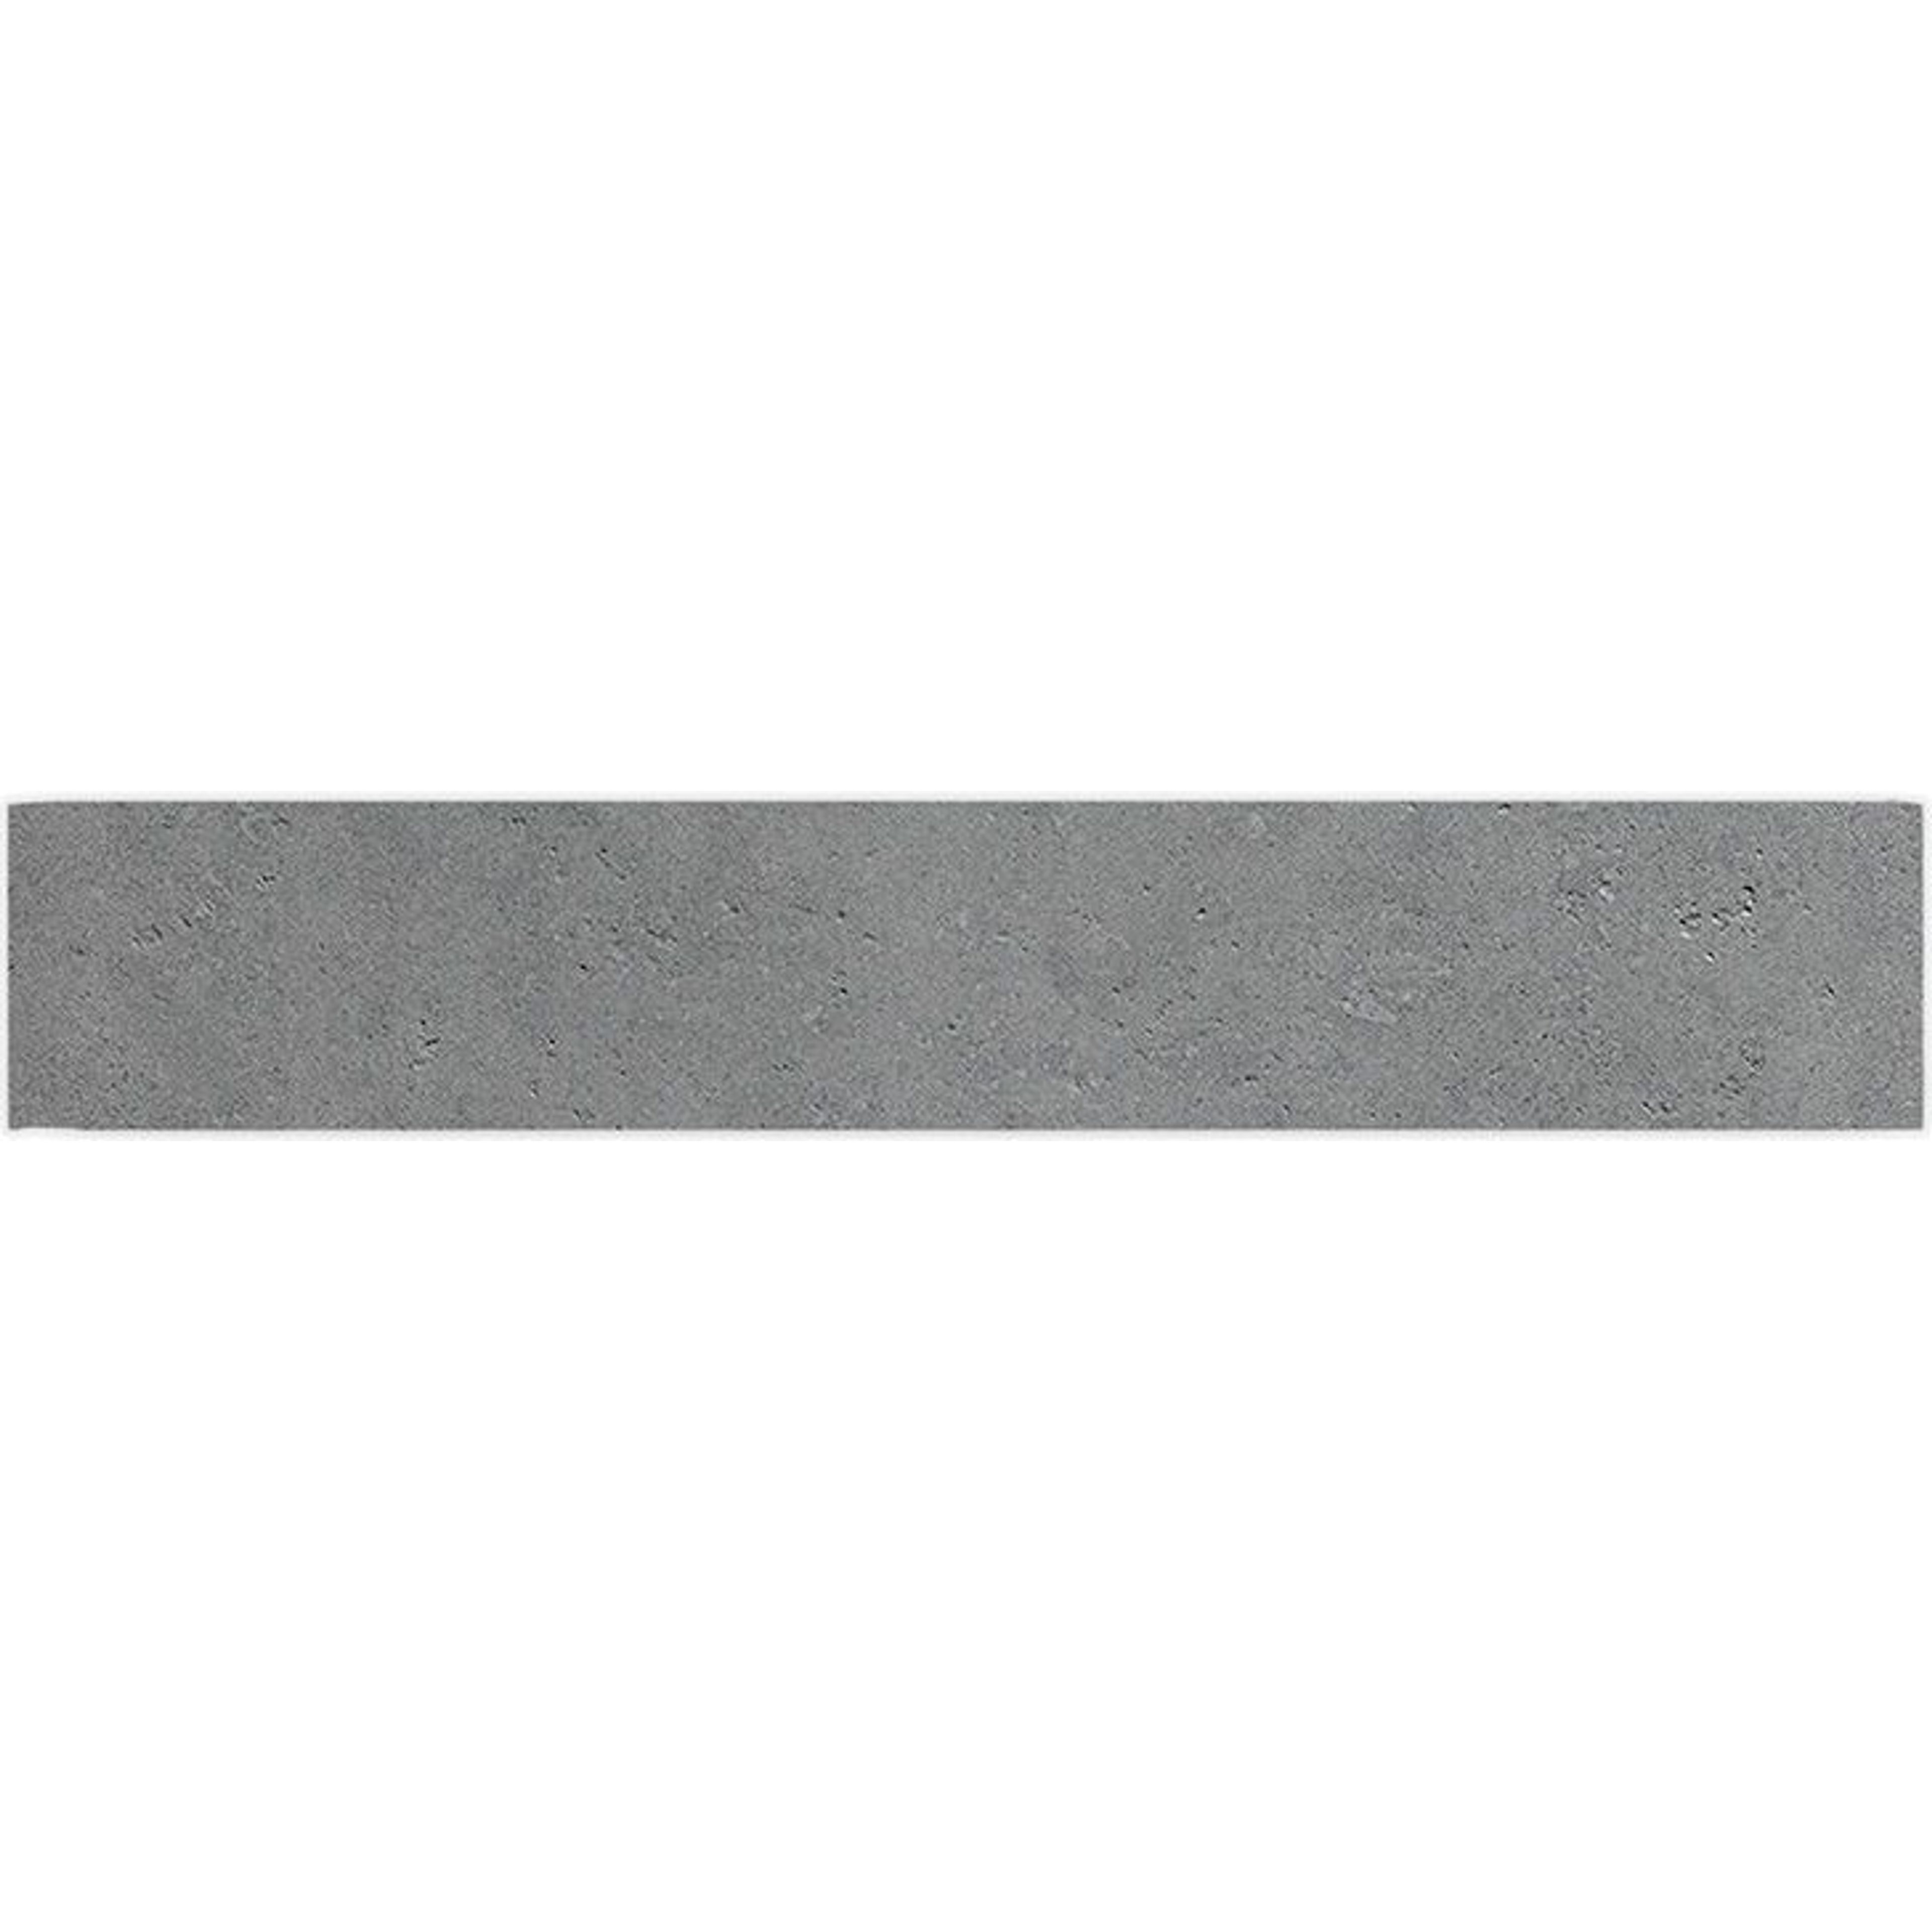 3.8125" x 23.5"  undefined Paver